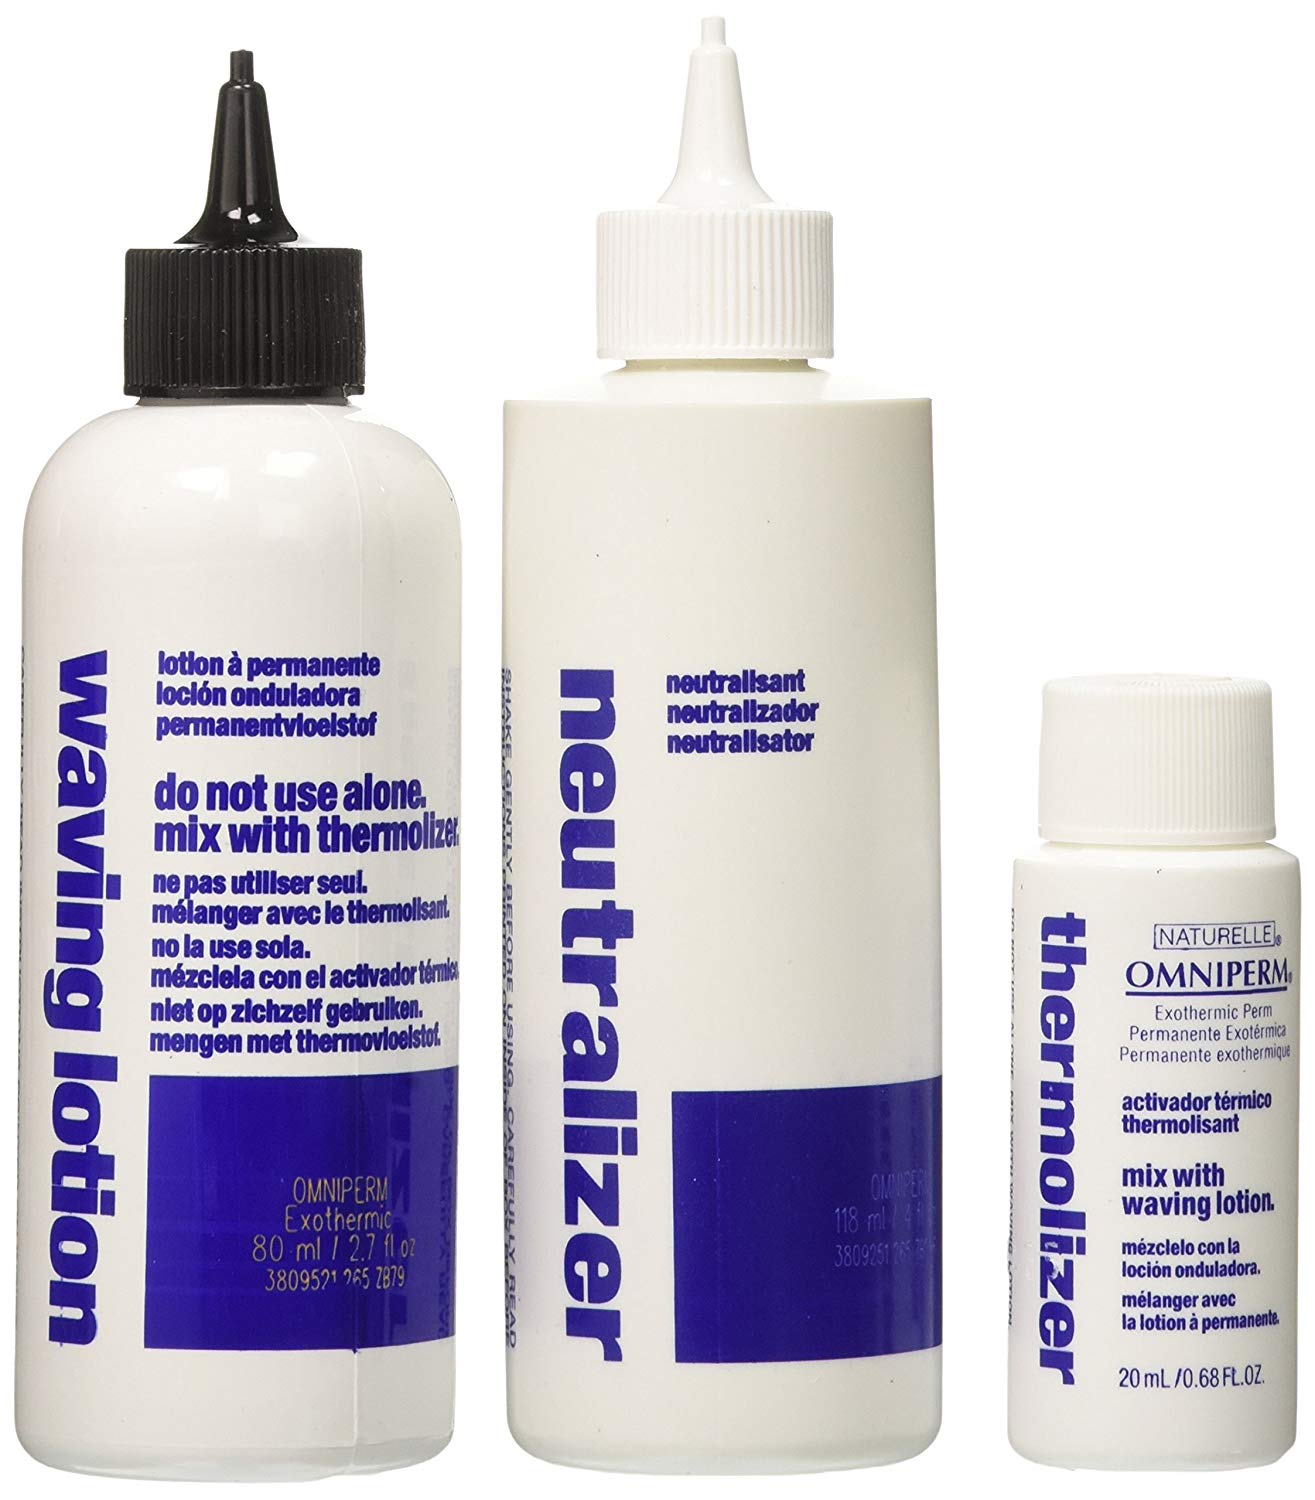 Naturelle Omniperm One Formula Exothermic Perm, Omniperm One Formula Exothermic Perm enhances hair's resilience and leaves hair in superior condition By Zotos - image 3 of 5